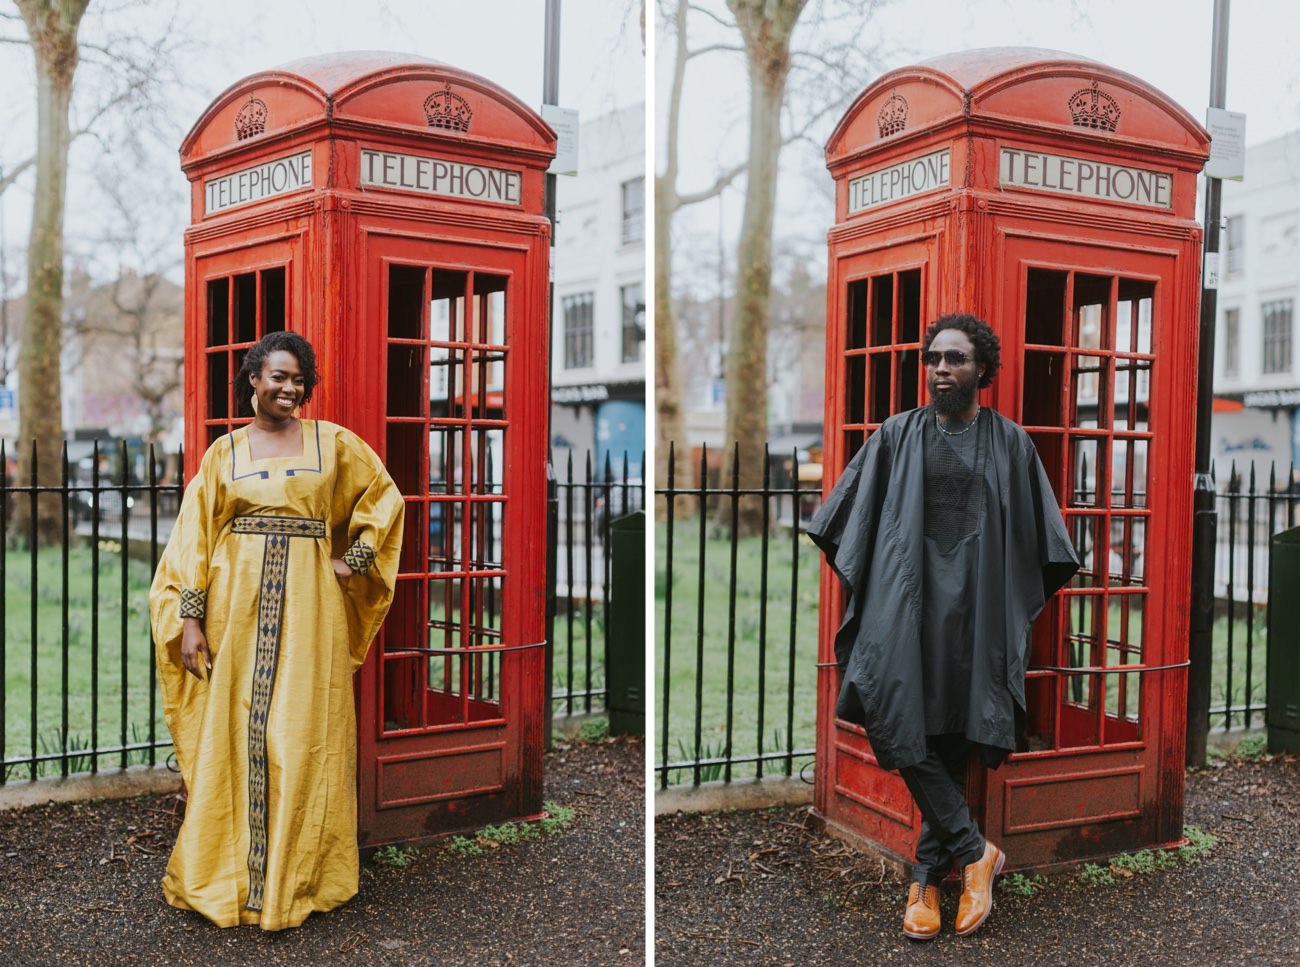 British Telephone Boxes in Islington, Portraits in London